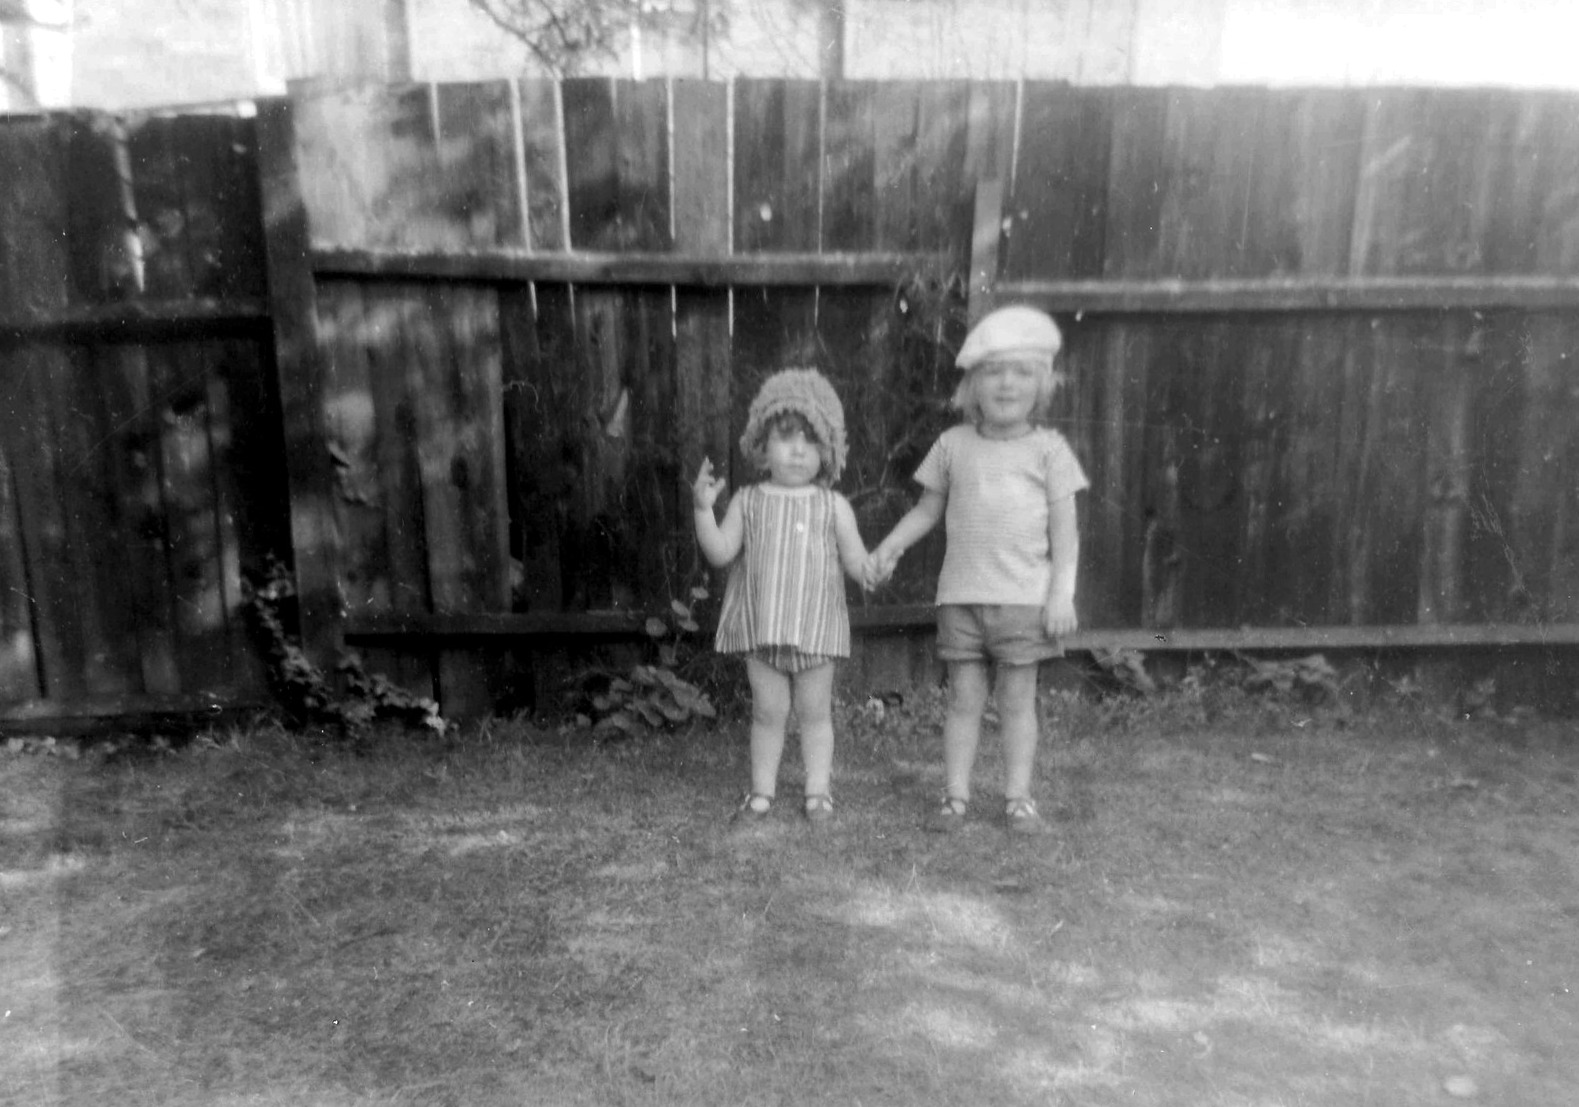 Family History: Danesbury Avenue, Tuckton, Christchurch, Dorset - 24th January 2020: Nosher and Sis by the garden fence, 1970